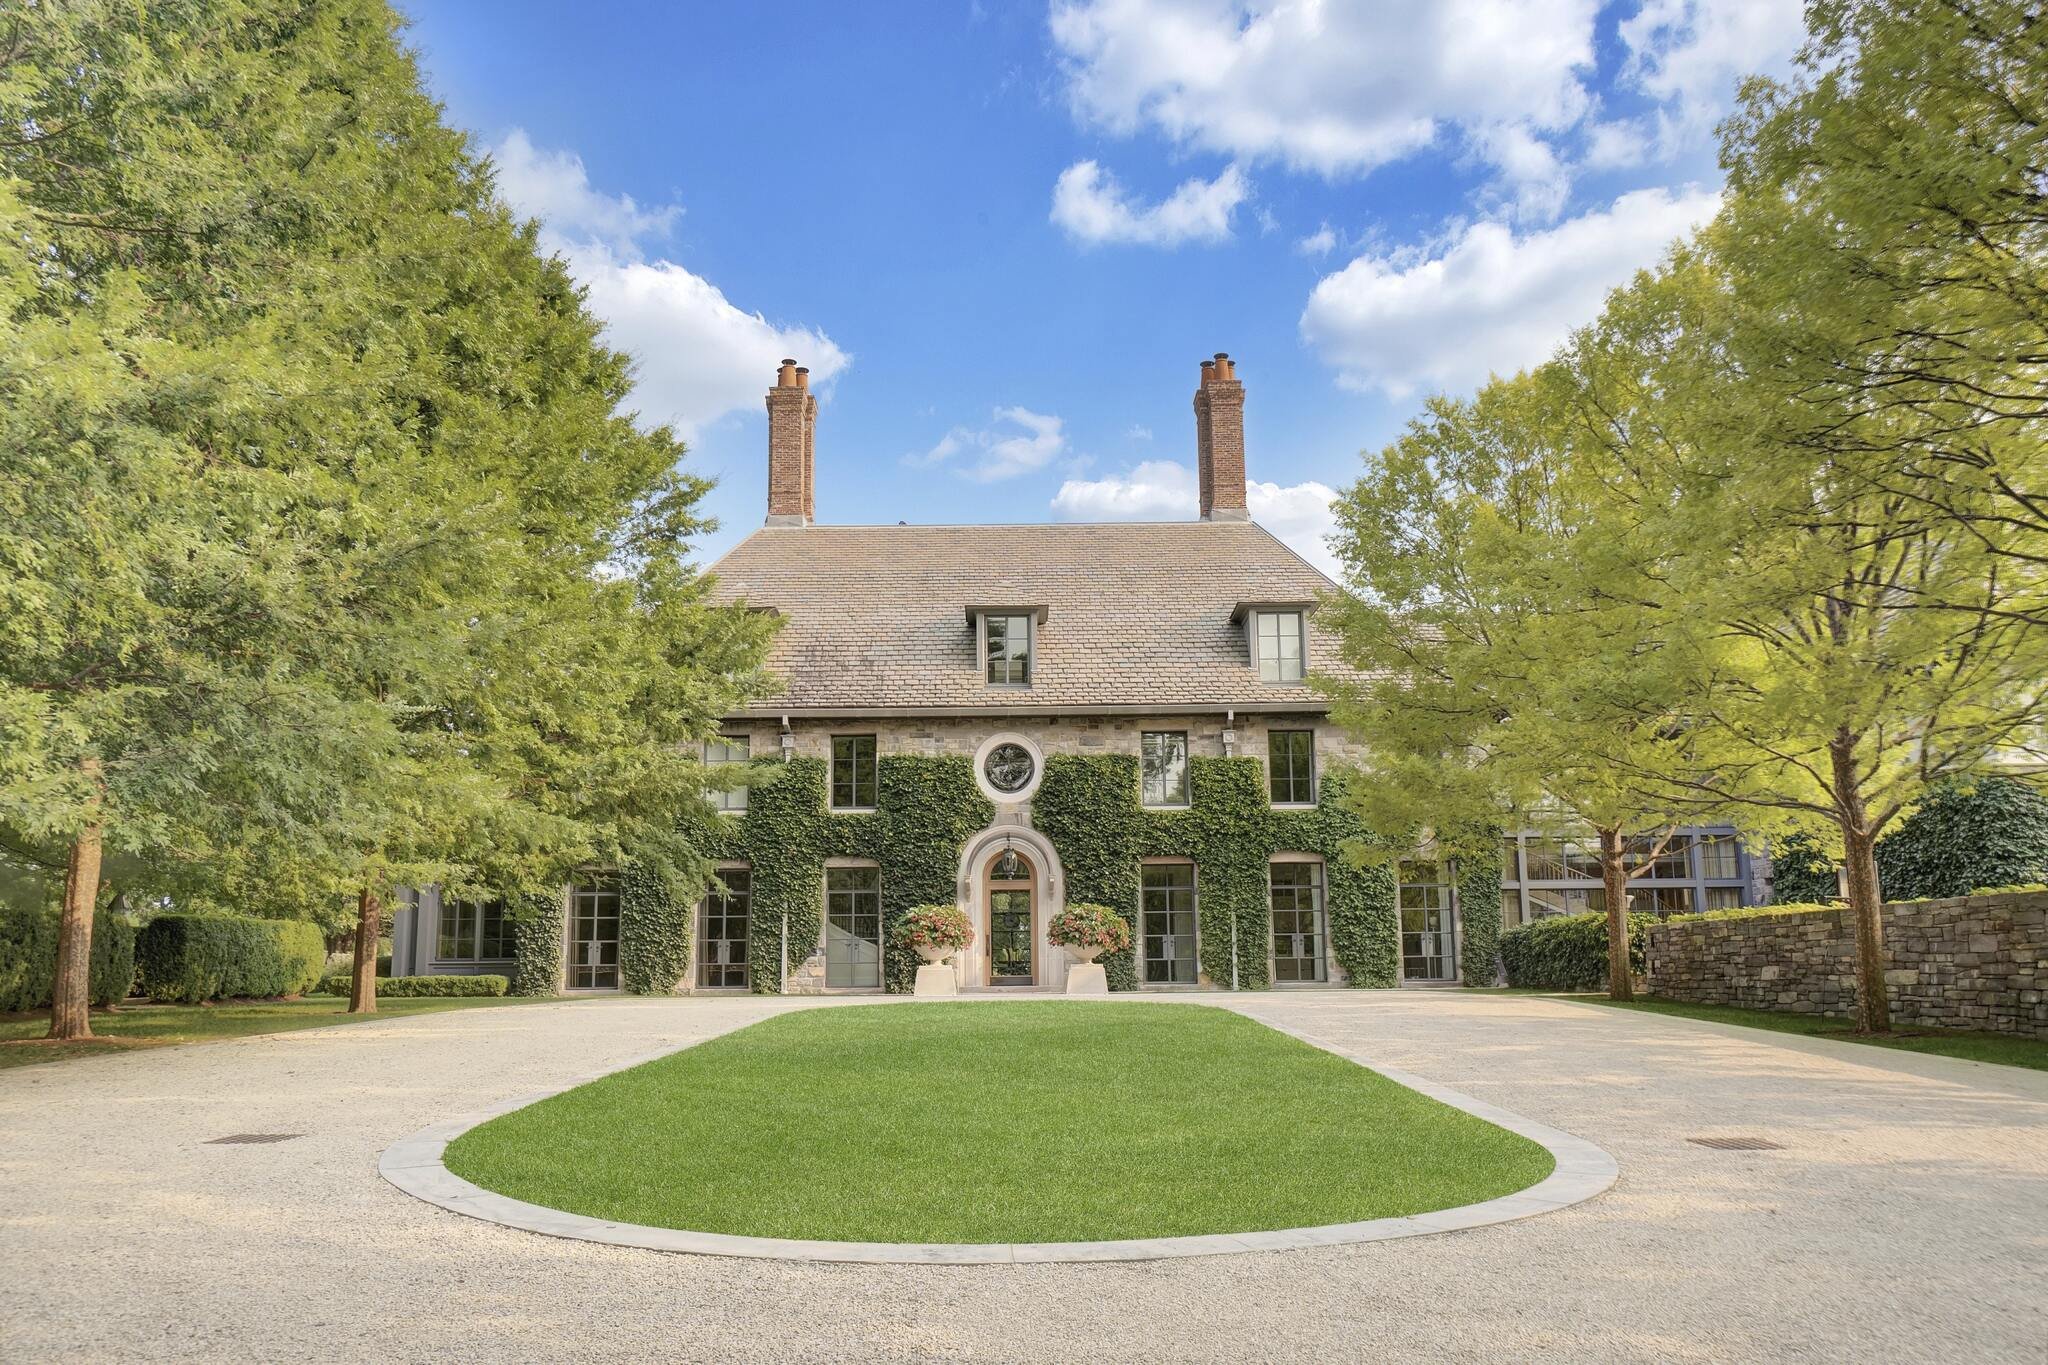  Built in 2008, the 16,359-square-foot mansion with 7-bedrooms and 9 ½ bathrooms on 5+ gated acres is known for its classic design, hilltop views of Long Island Sound, and underground tunnel which takes you to a sleek and modern pool house. 